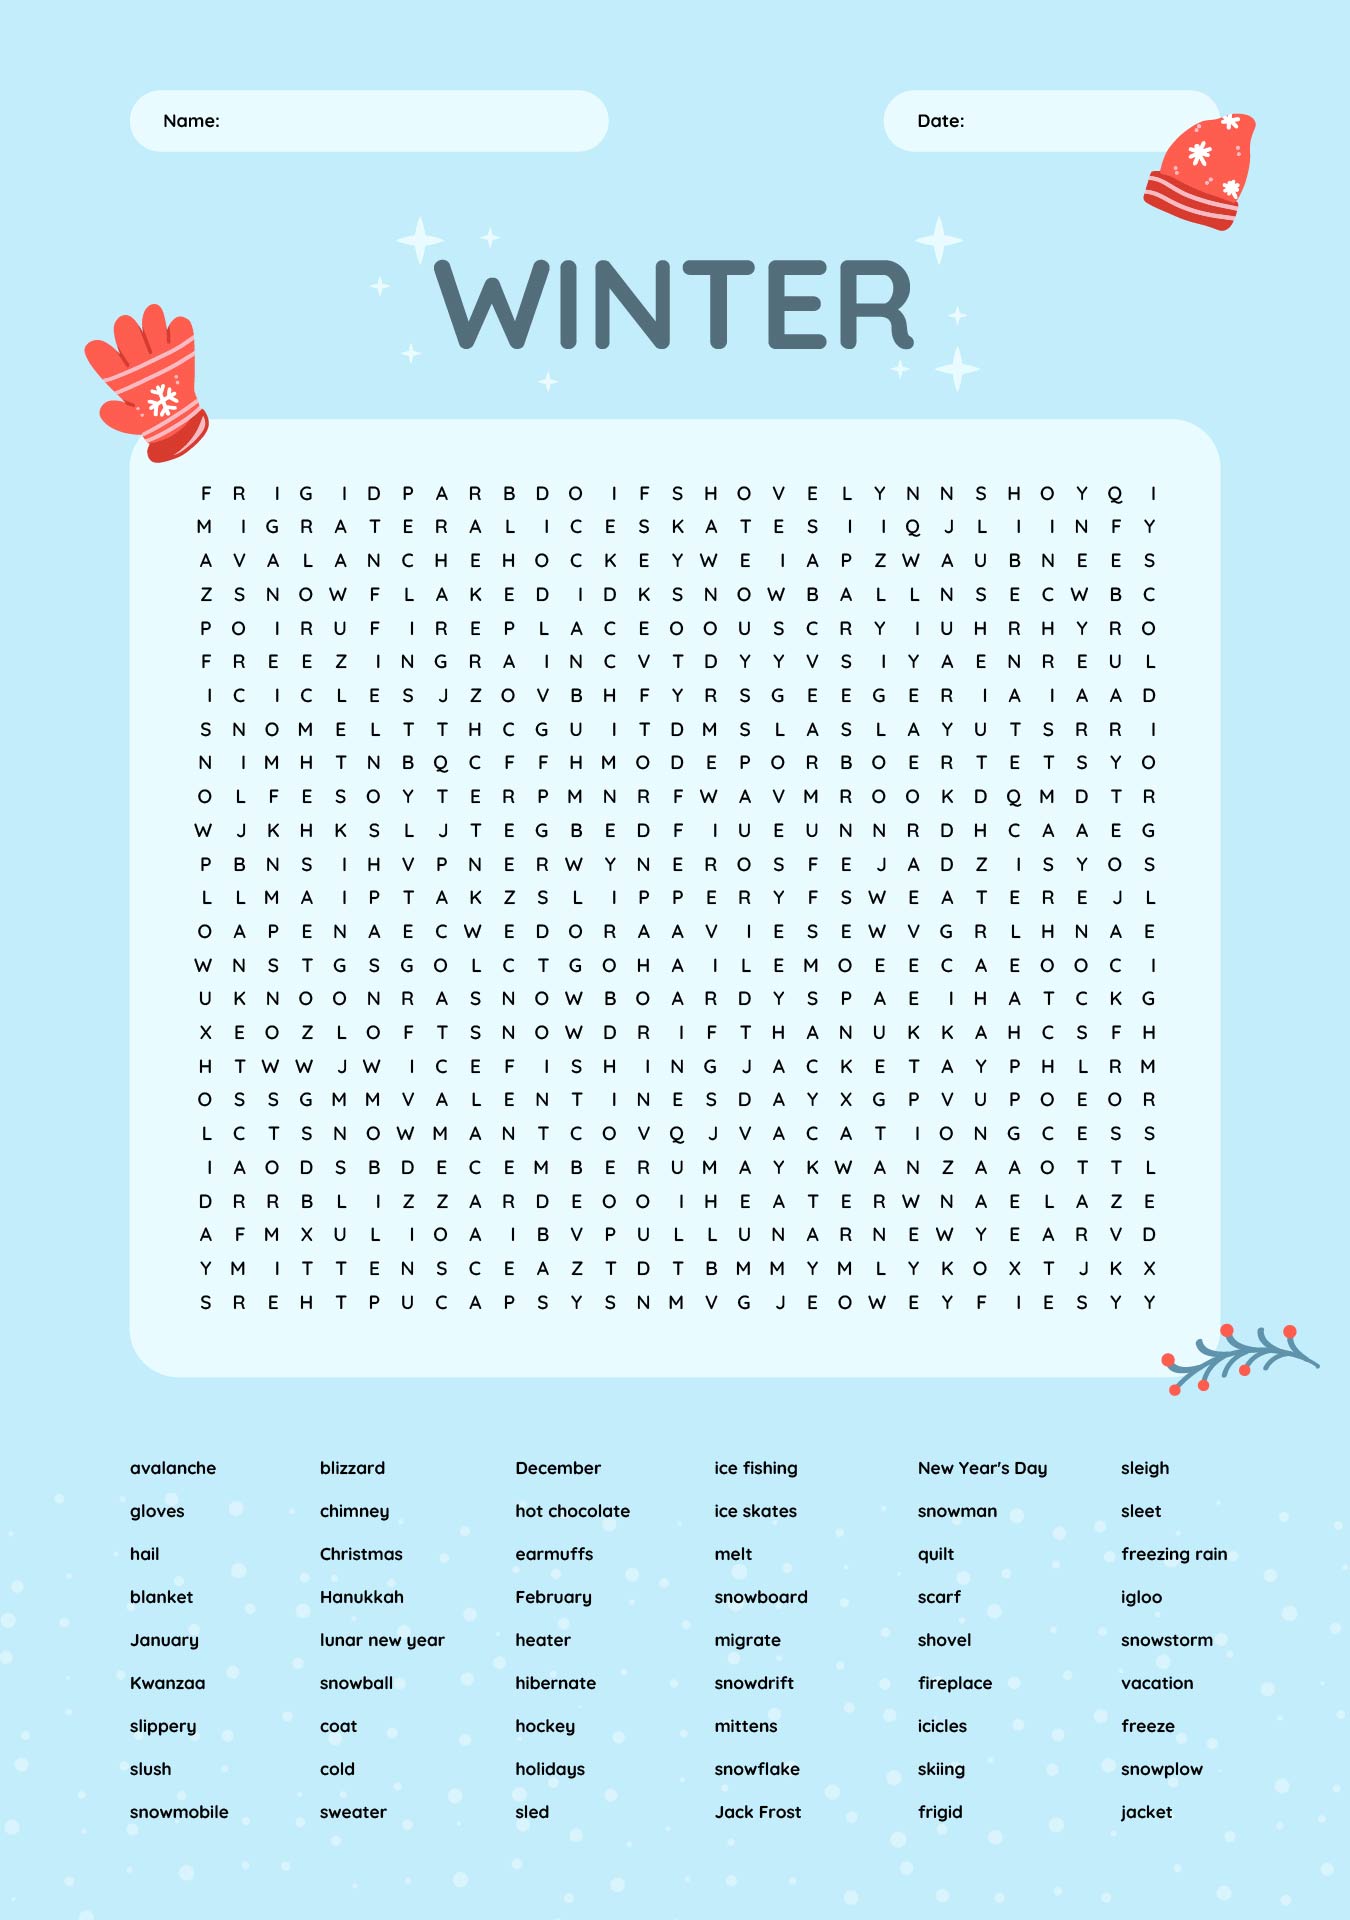 5-best-images-of-printable-winter-word-search-difficult-fun-winter